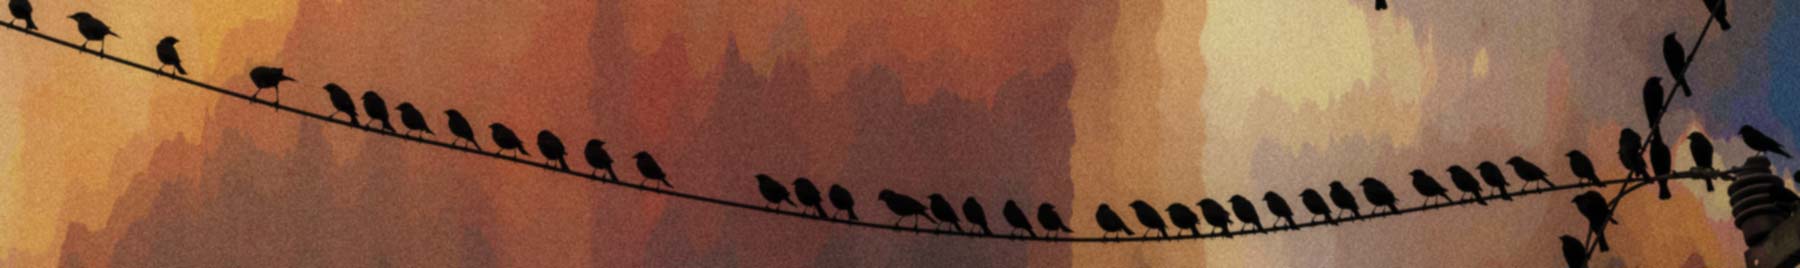 Birds silhouetted on a telephone wire